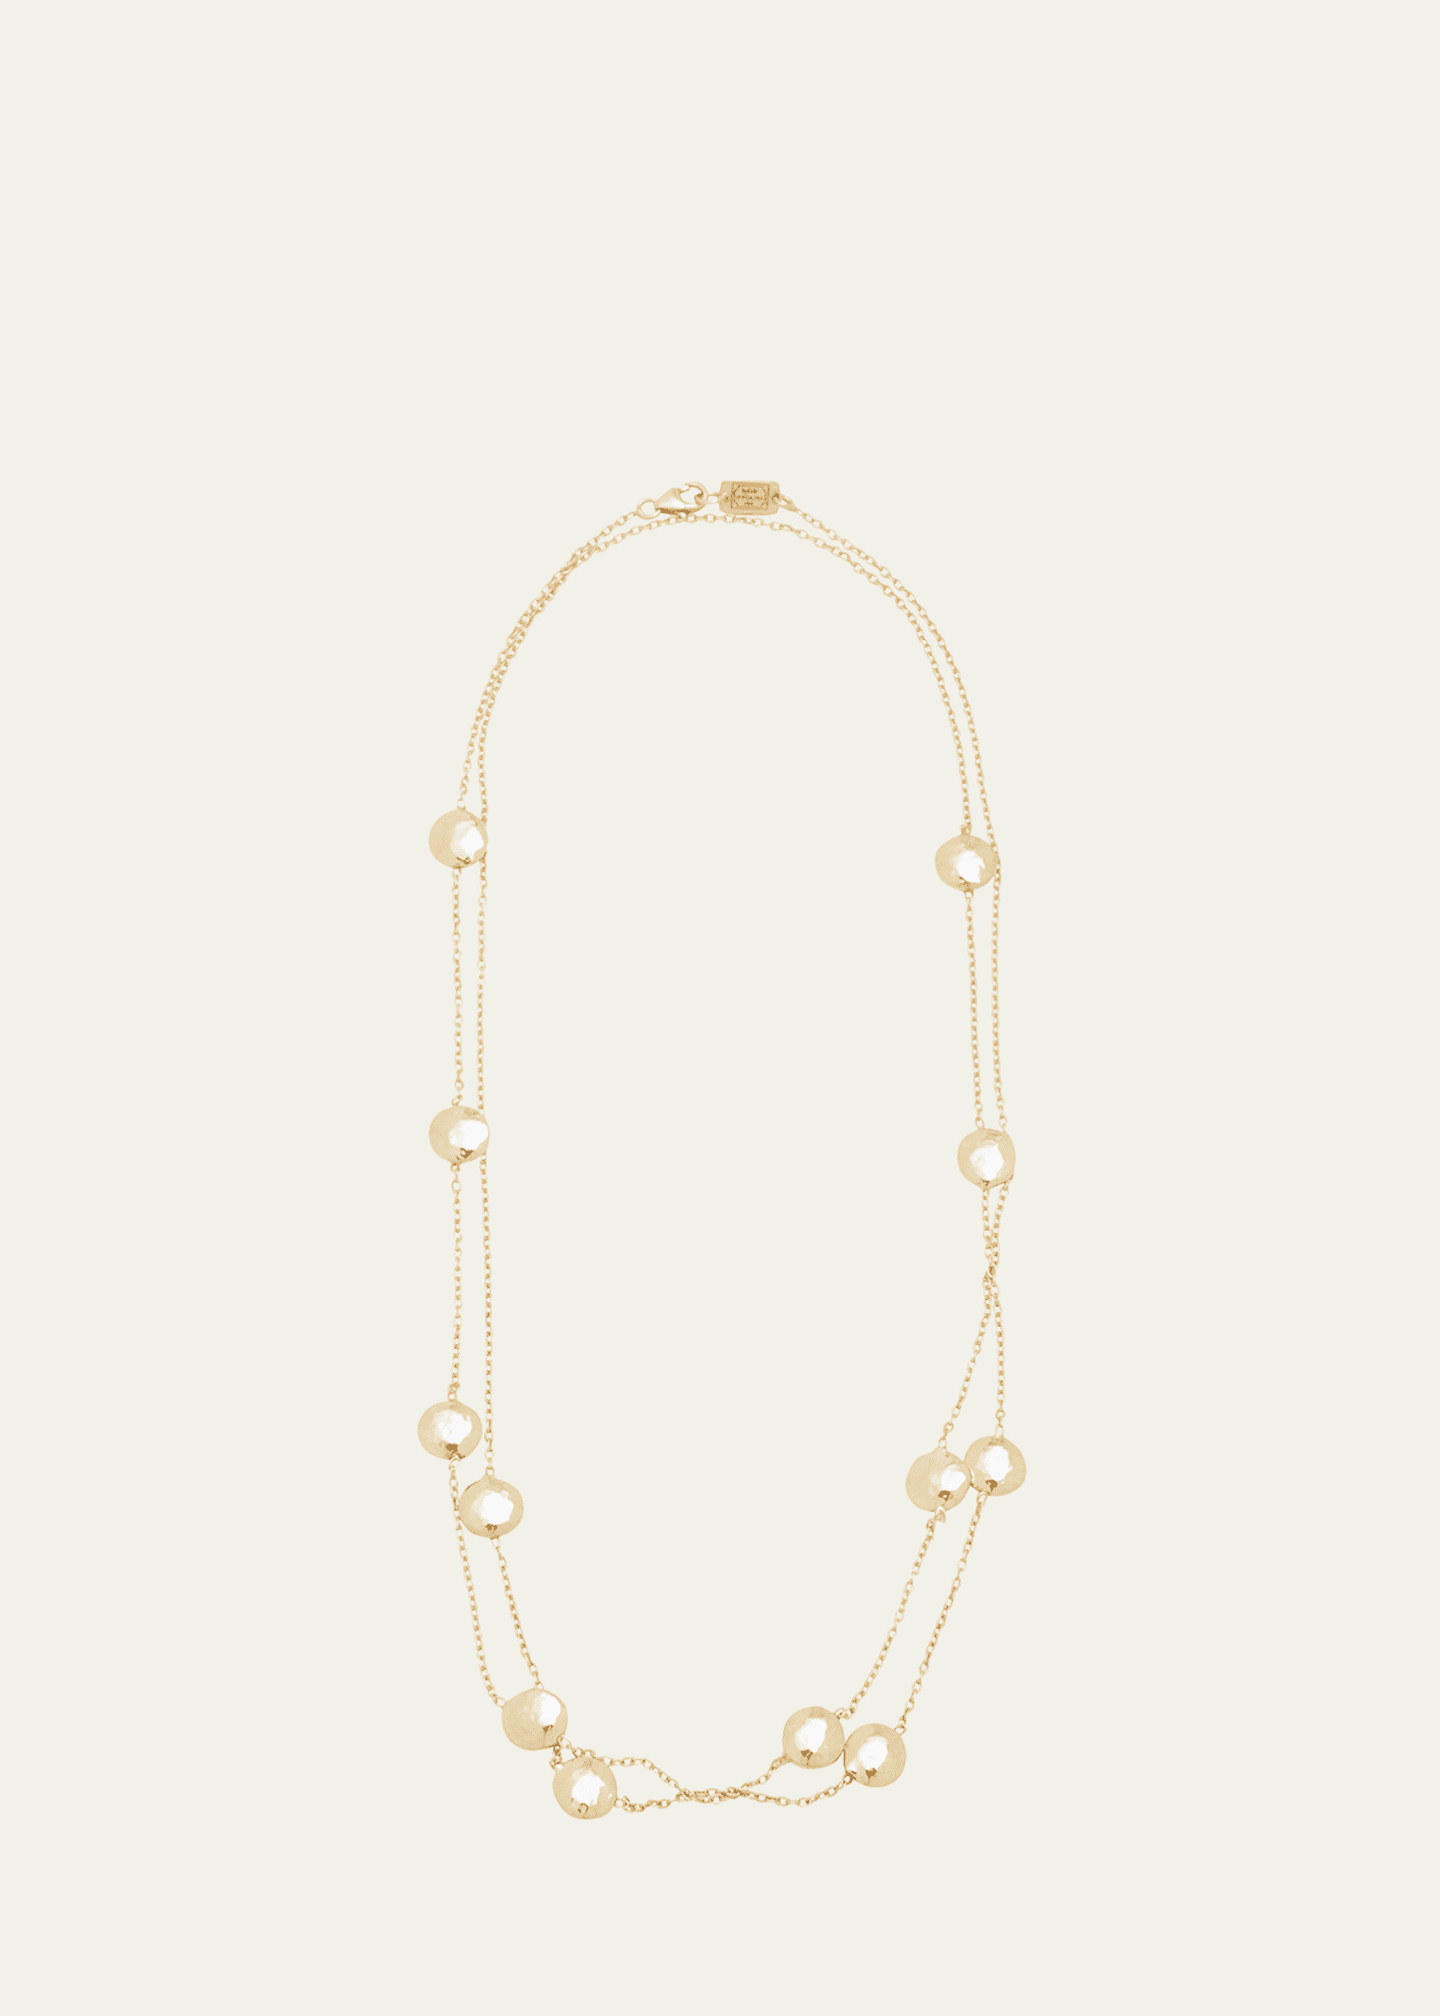 Ippolita Long Hammered Pinball Layering Necklace in 18K Gold Image 1 of 4